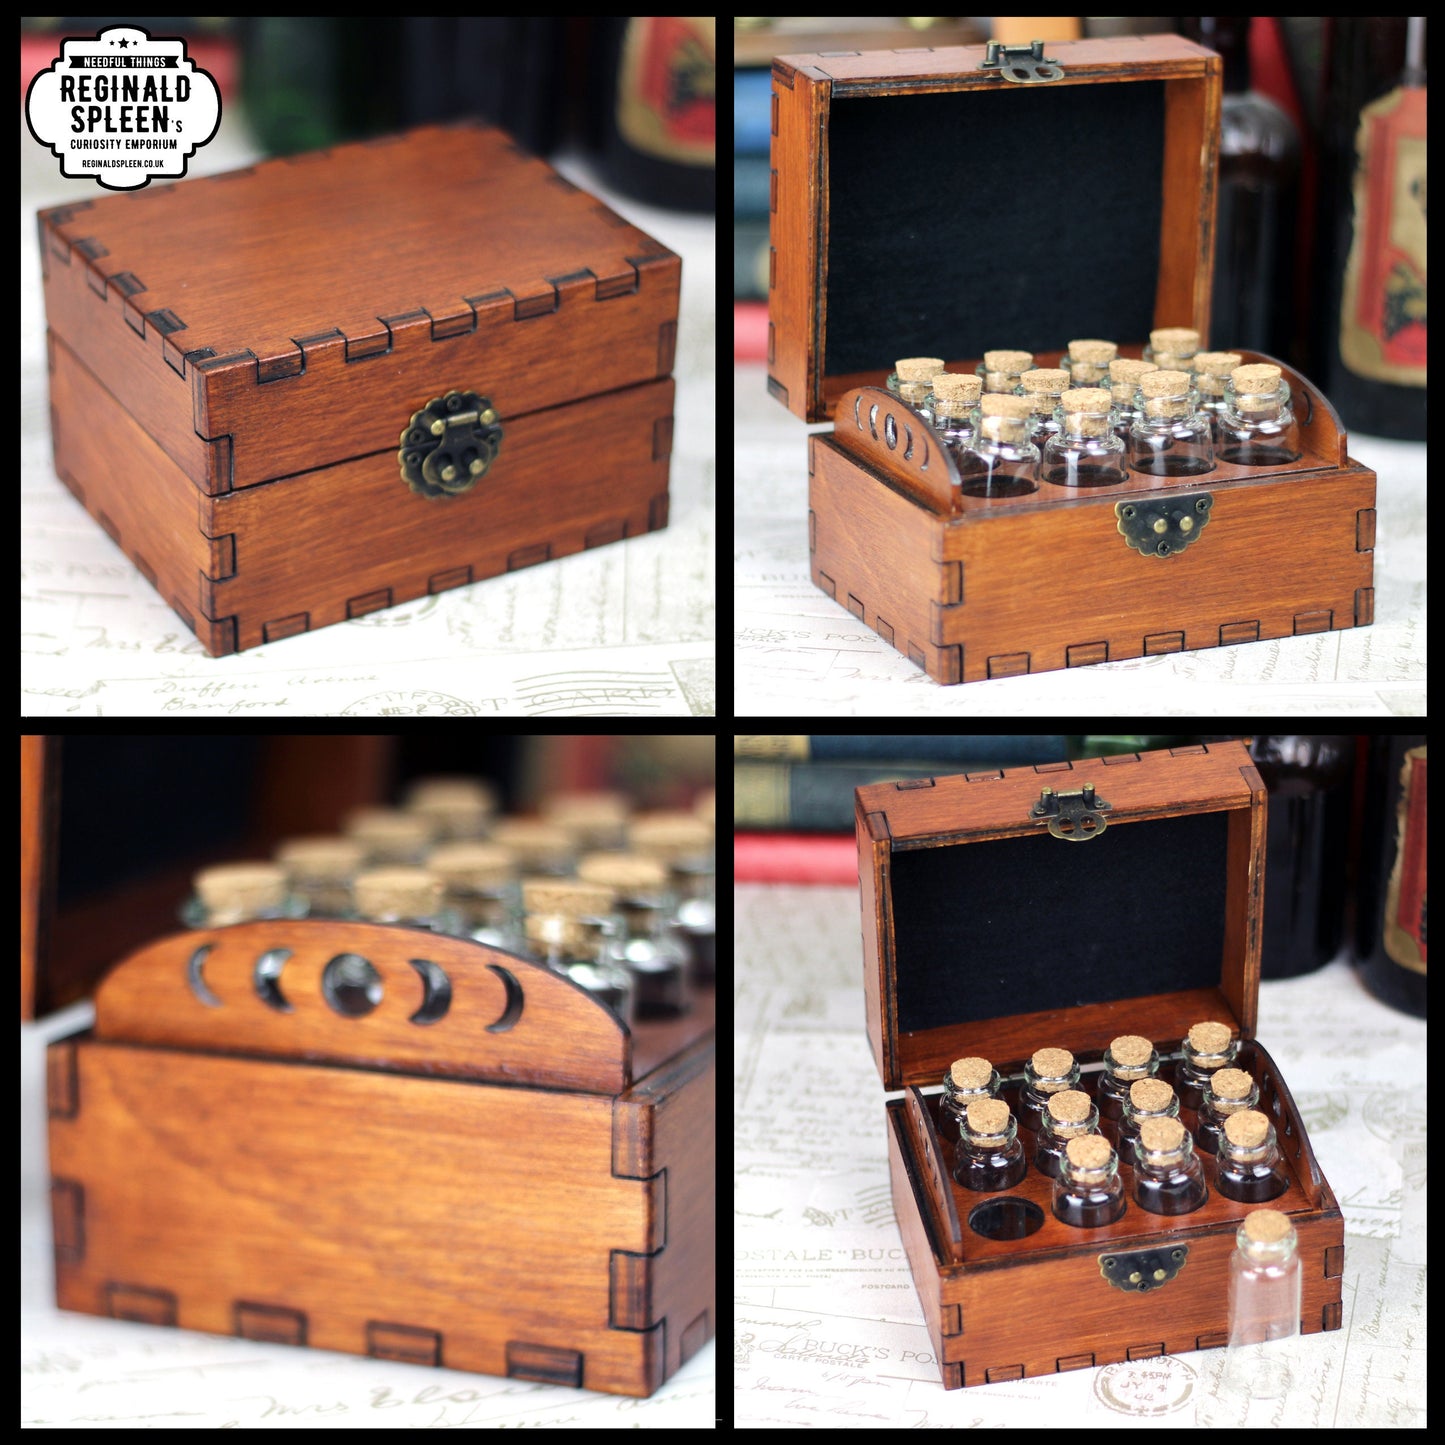 Wooden apothecary chest for potions or essential oil storage box with 12 glass bottles, cork stoppers and labels